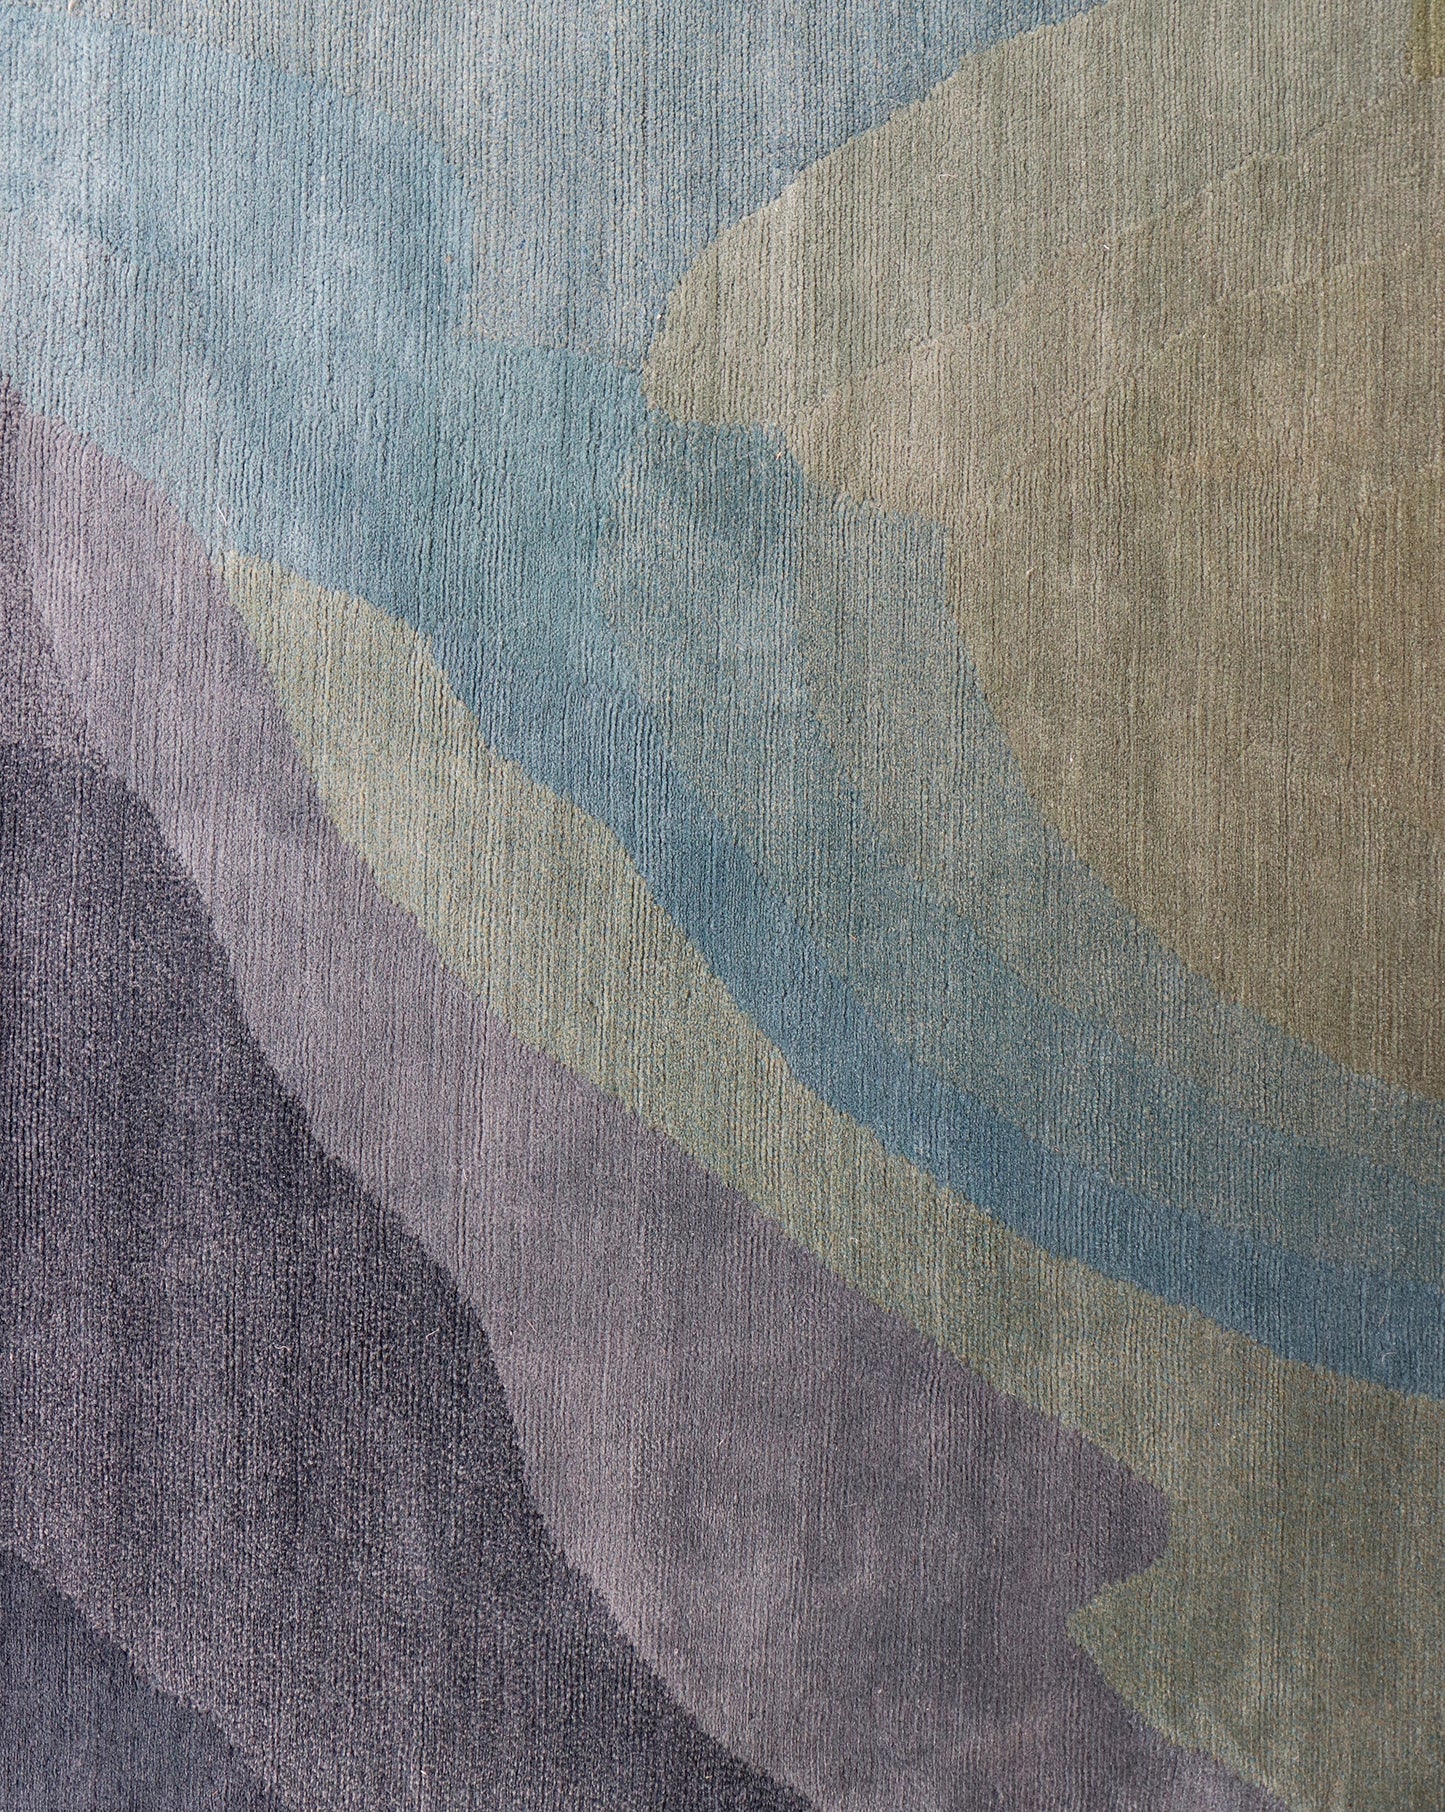 Experience the chromatic beauty of nature in the Progressions Hand Knotted Rug 5' x 8' Thalassa colorway of our hand-knotted rug collection